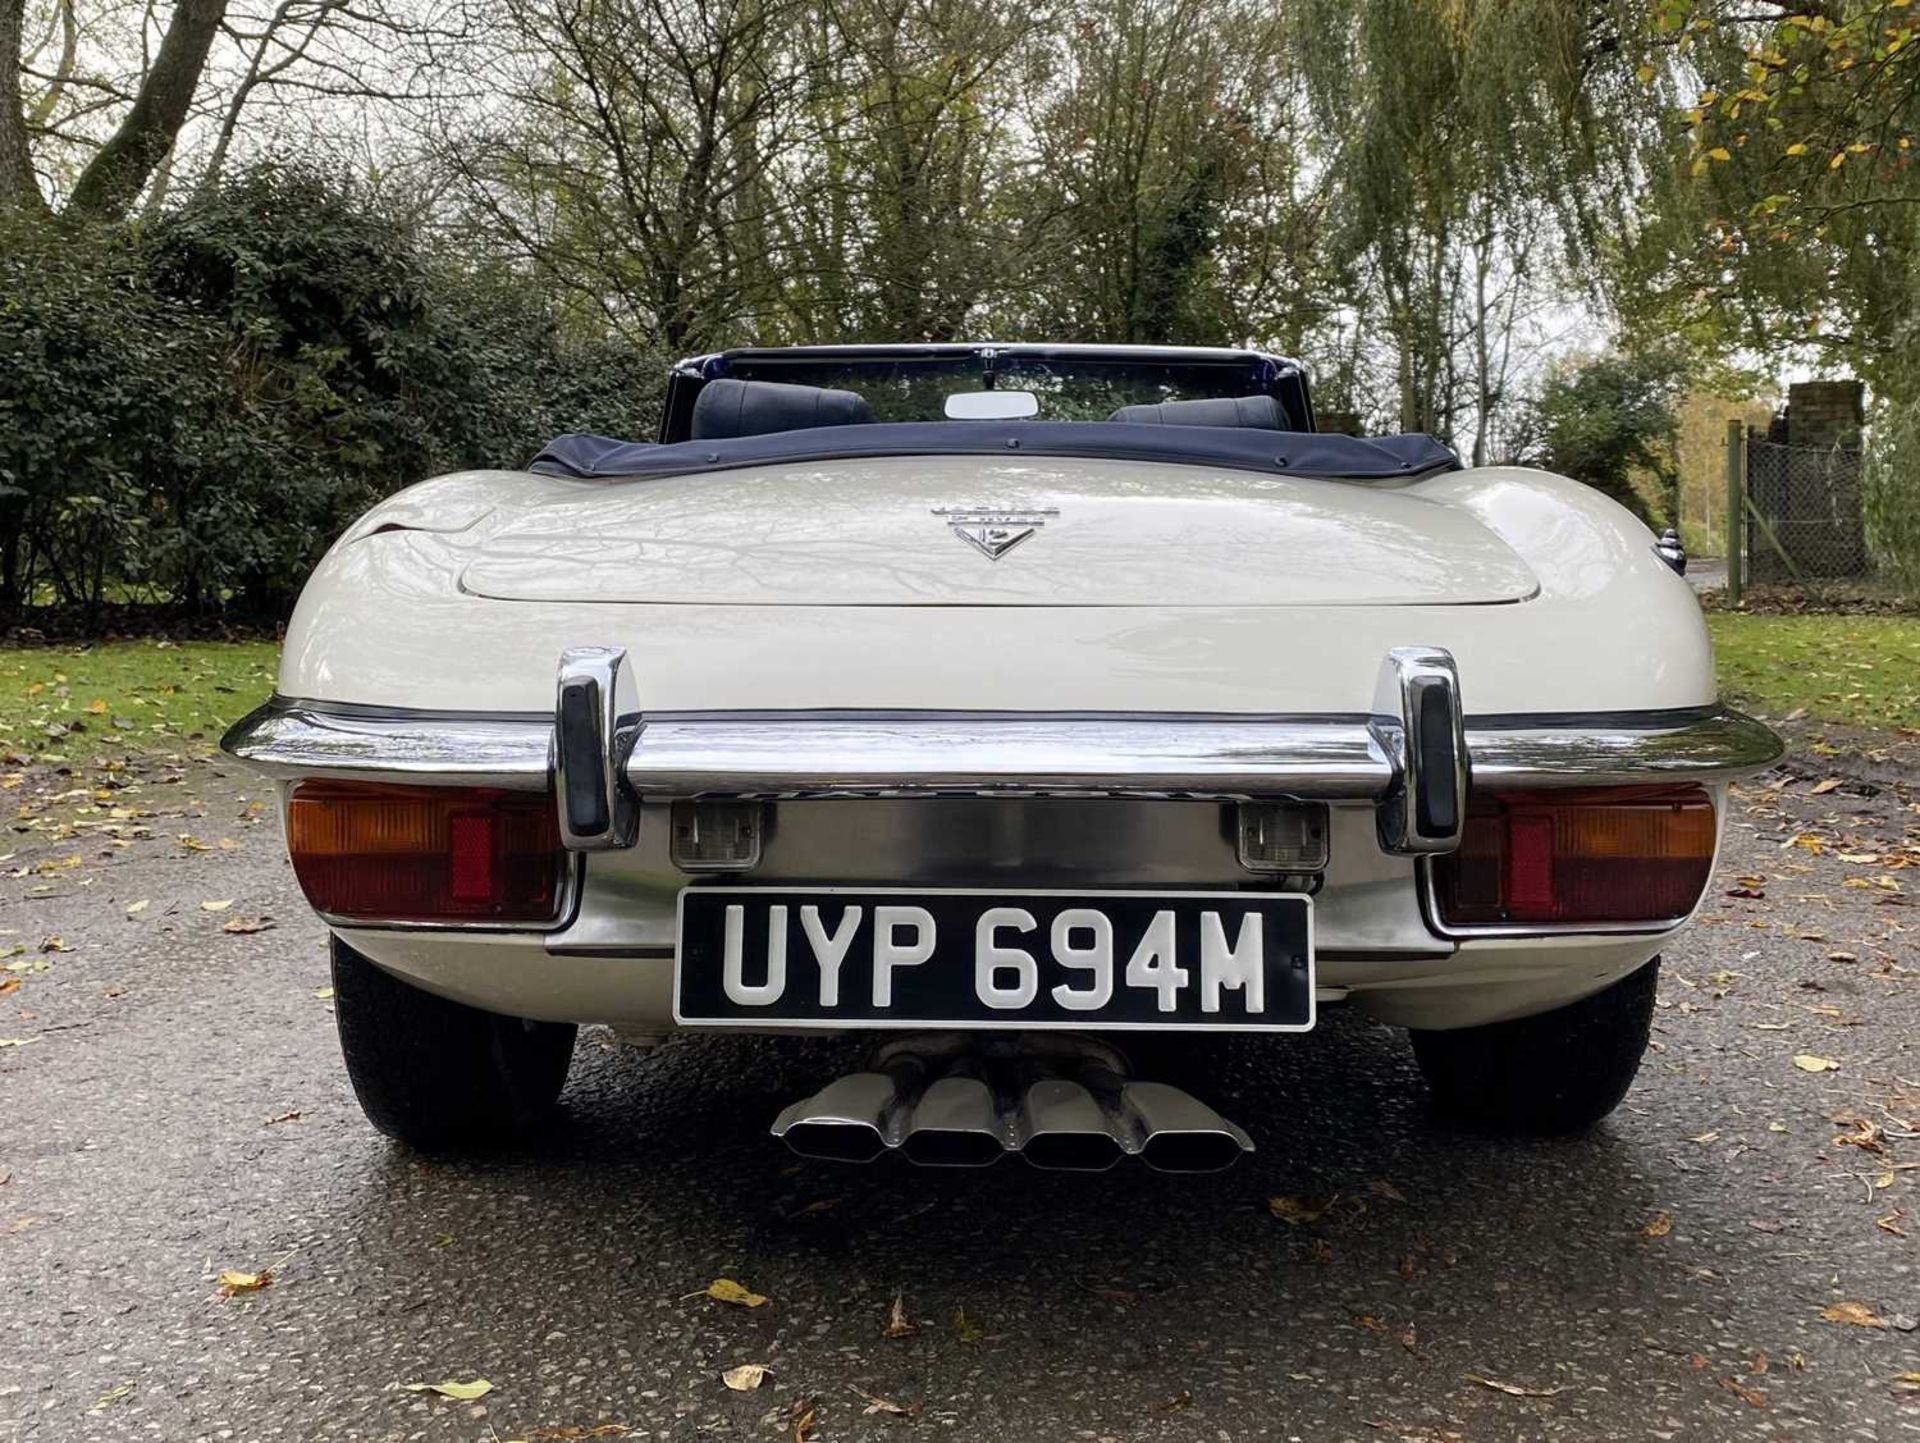 1973 Jaguar E-Type V12 Roadster As seen in Only Fools and Horses - Image 28 of 105